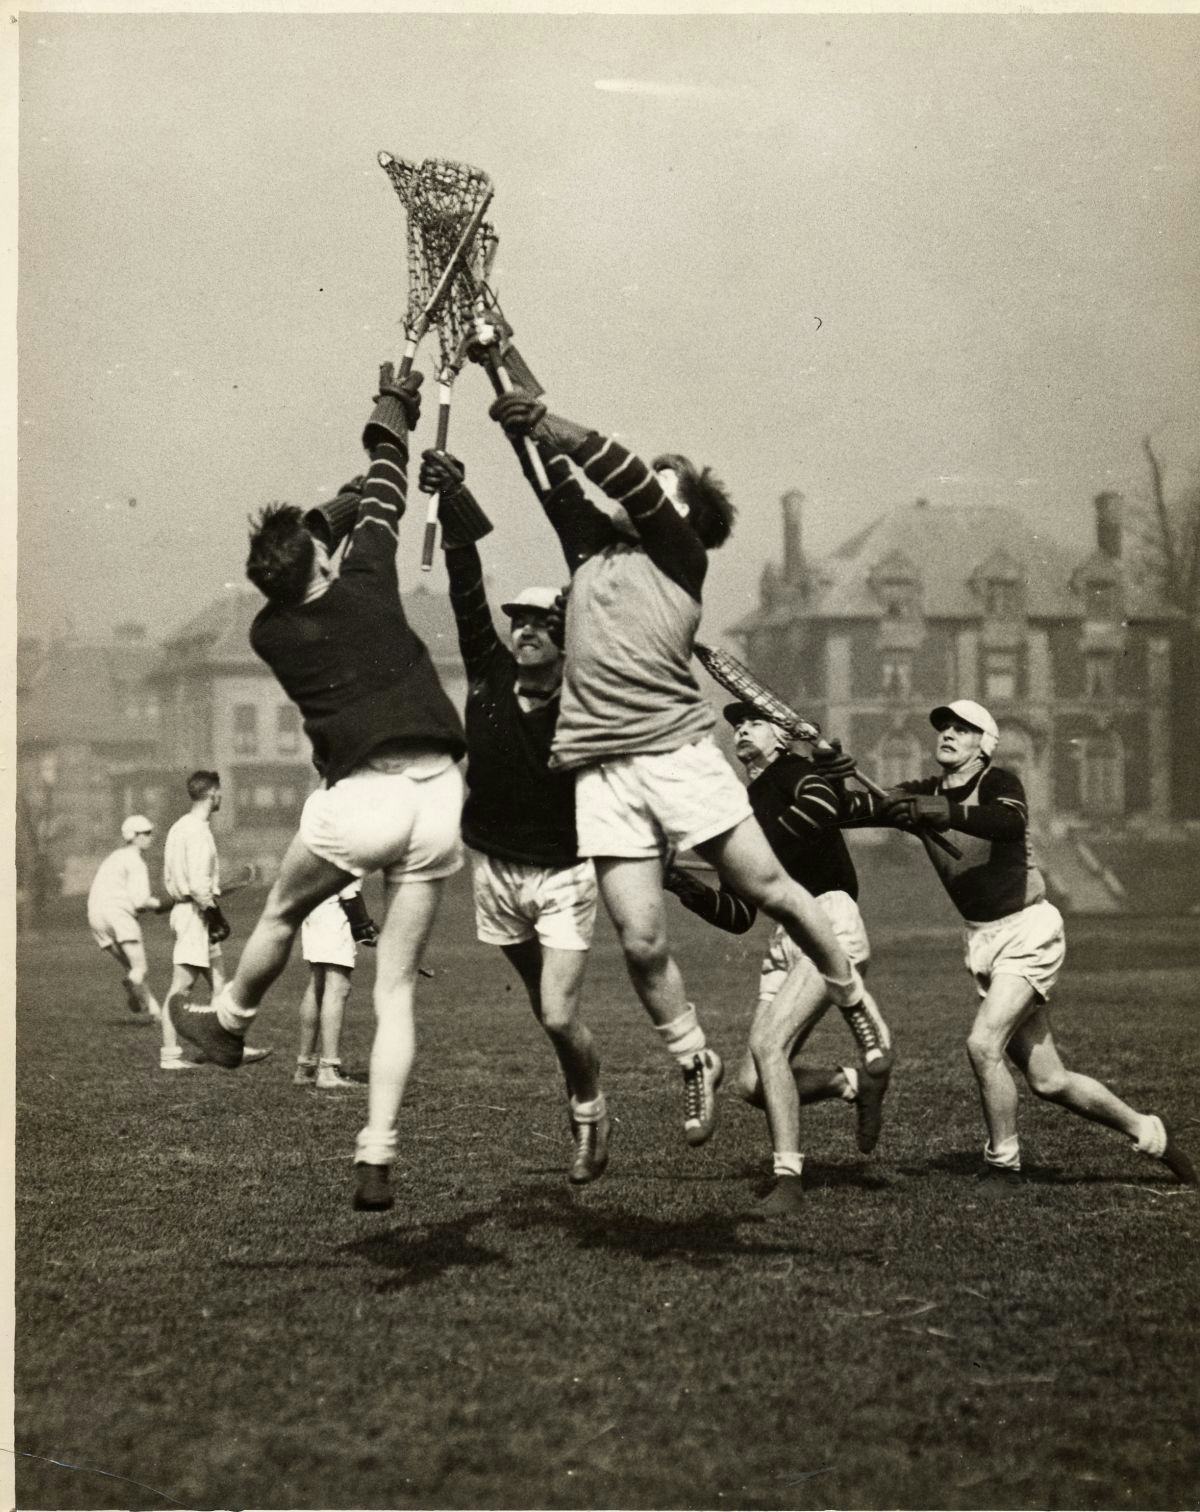 Black and white photo of Stevens Men's Lacrosse team reaching for a ball, circa 1930s 